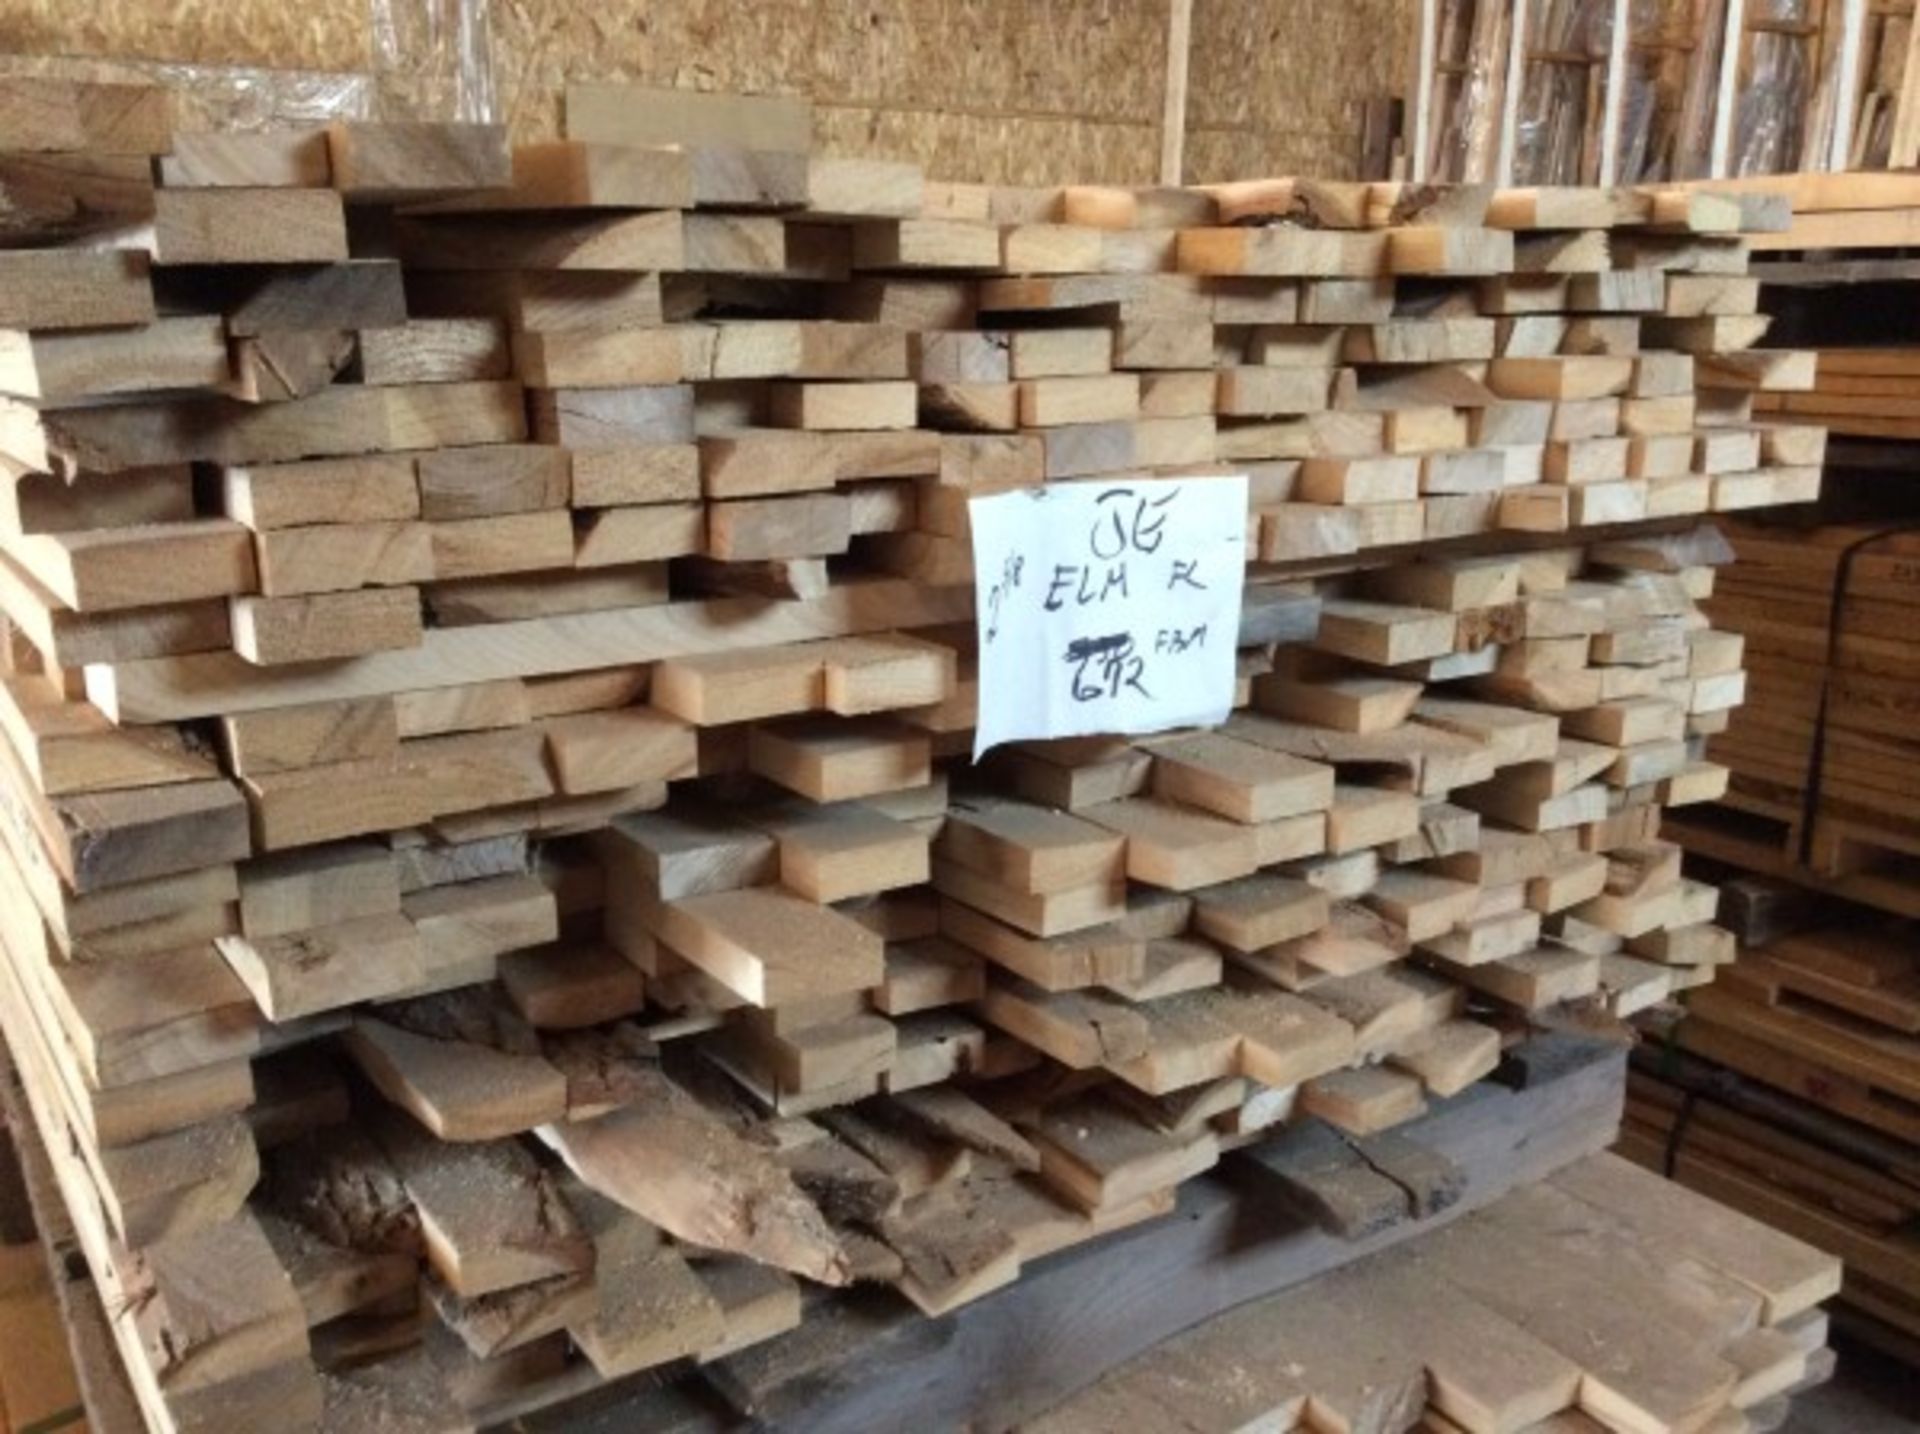 2 SKID LIFTS OF ELM ROUGH CUT LUMBER - APPROX 425 PCS - A - Image 3 of 4